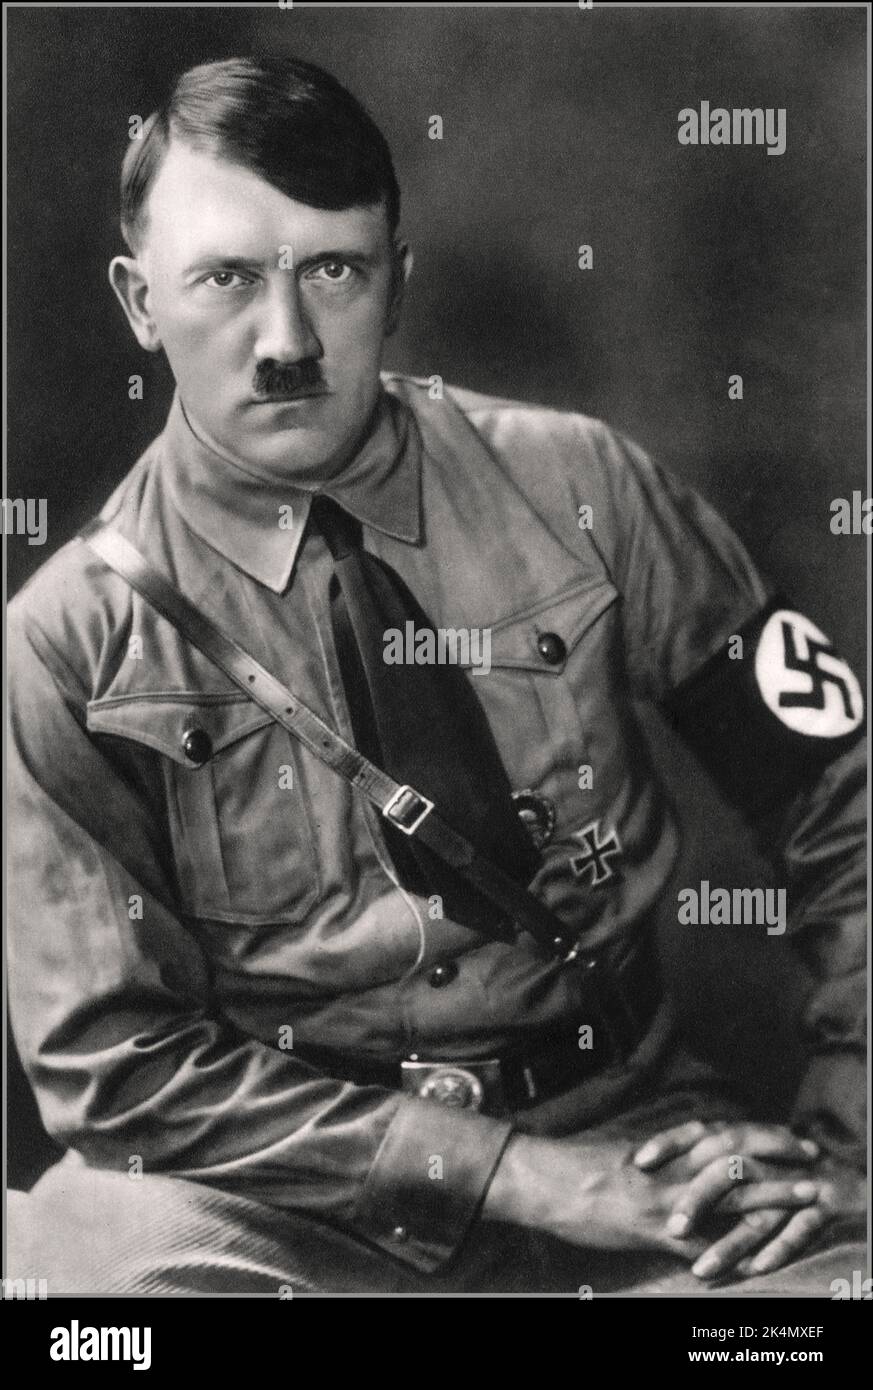 Adolf Hitler portrait in NSDAP Sturmabteilung Nazi uniform with swastika armband in the pre-war 1920's/30's photographed by Hoffmann his favoured personal photographer, for his book Mein Kampf Nazi NSDAP Swastika Germany Stock Photo